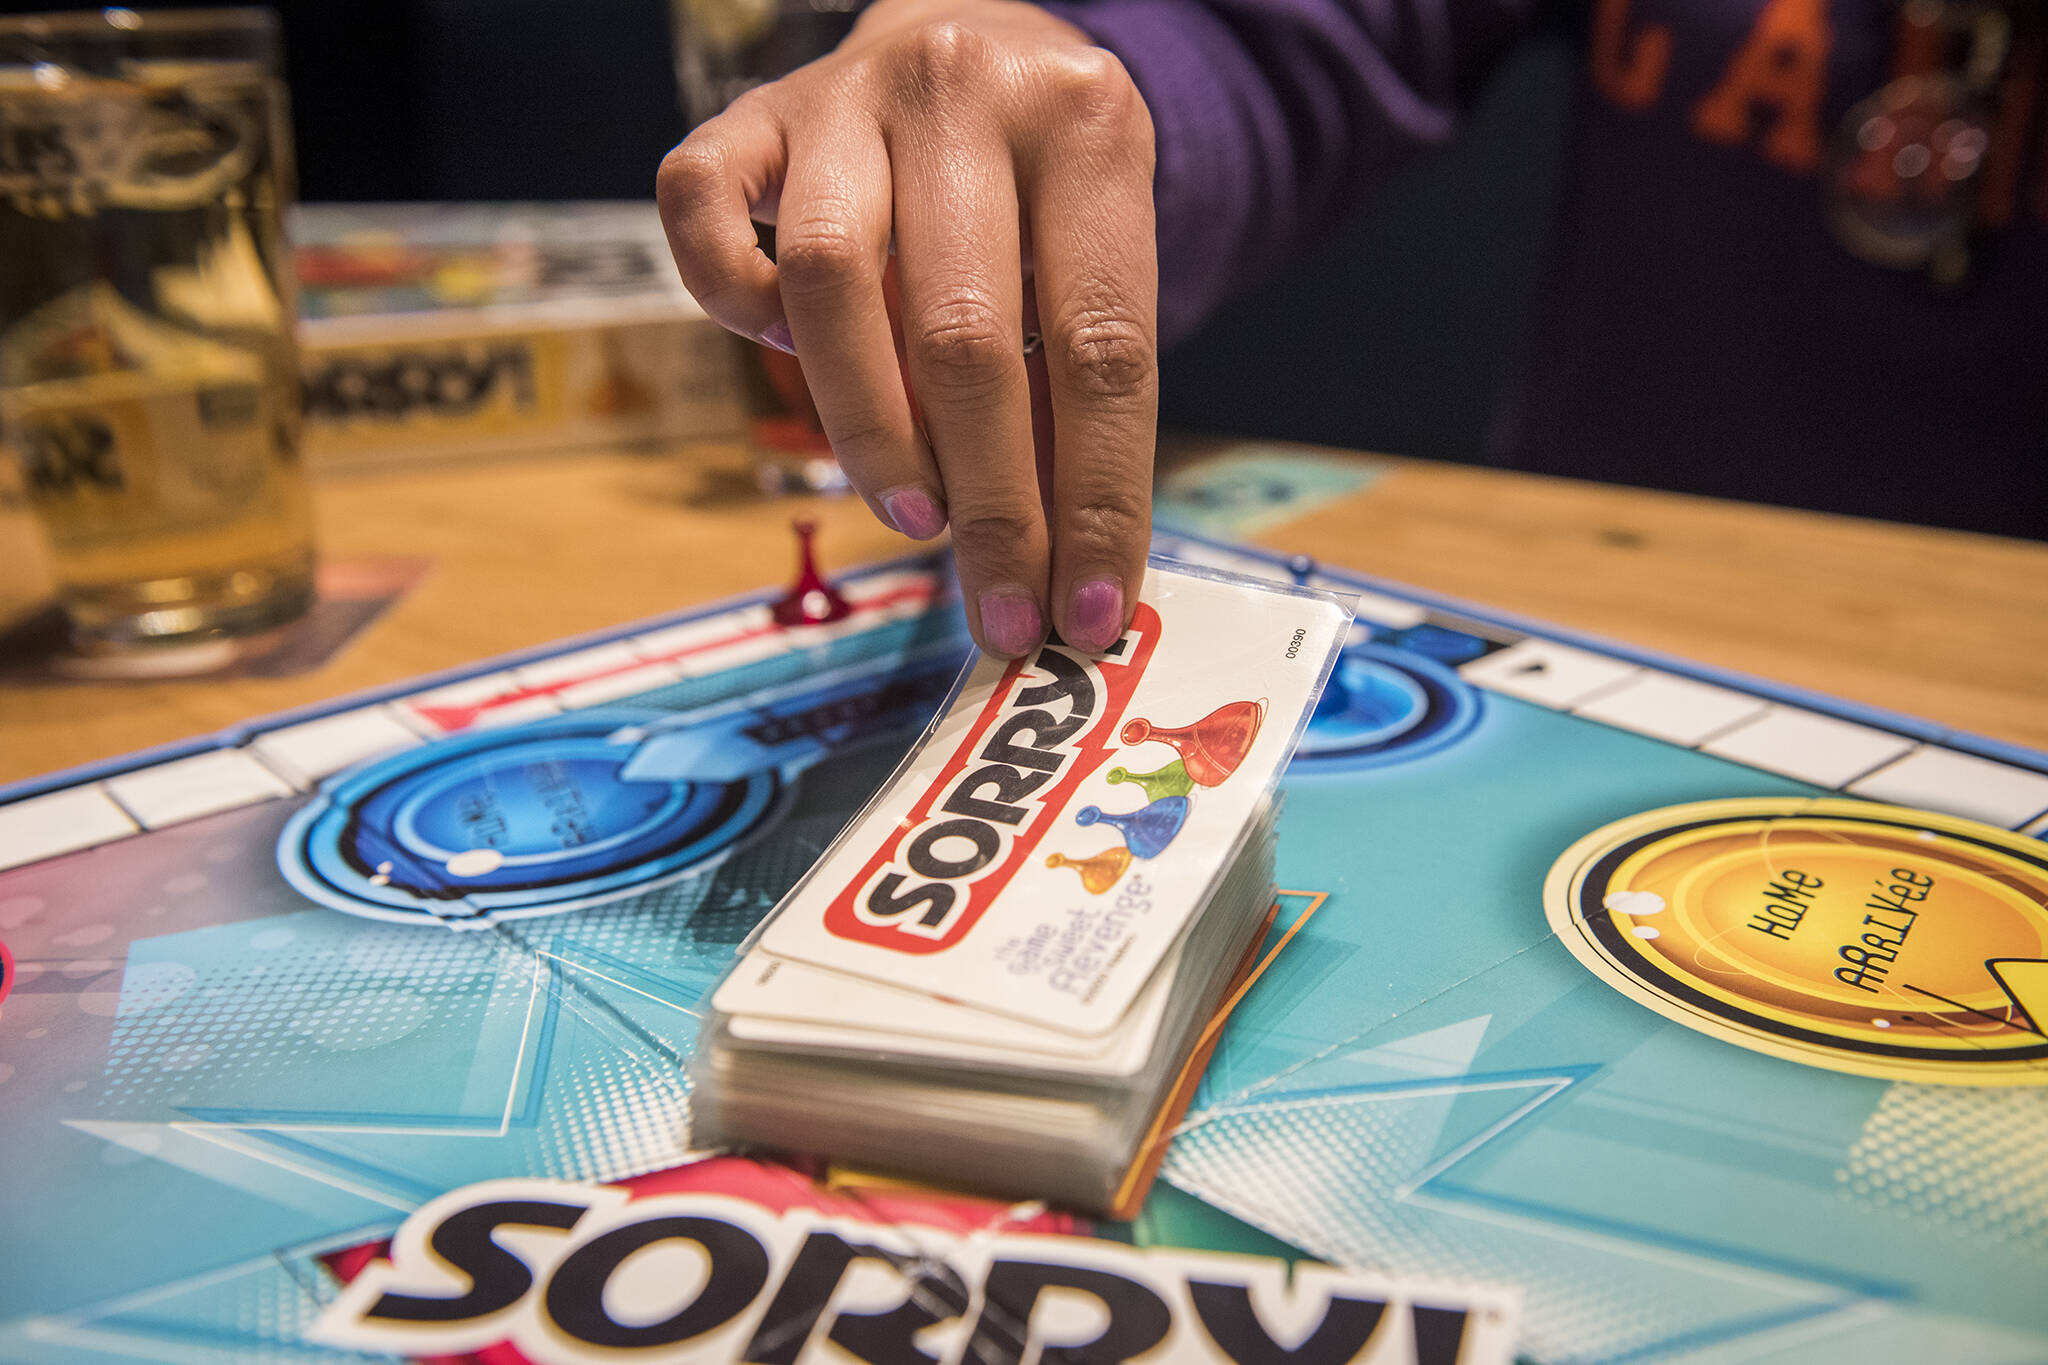 board game cafes toronto